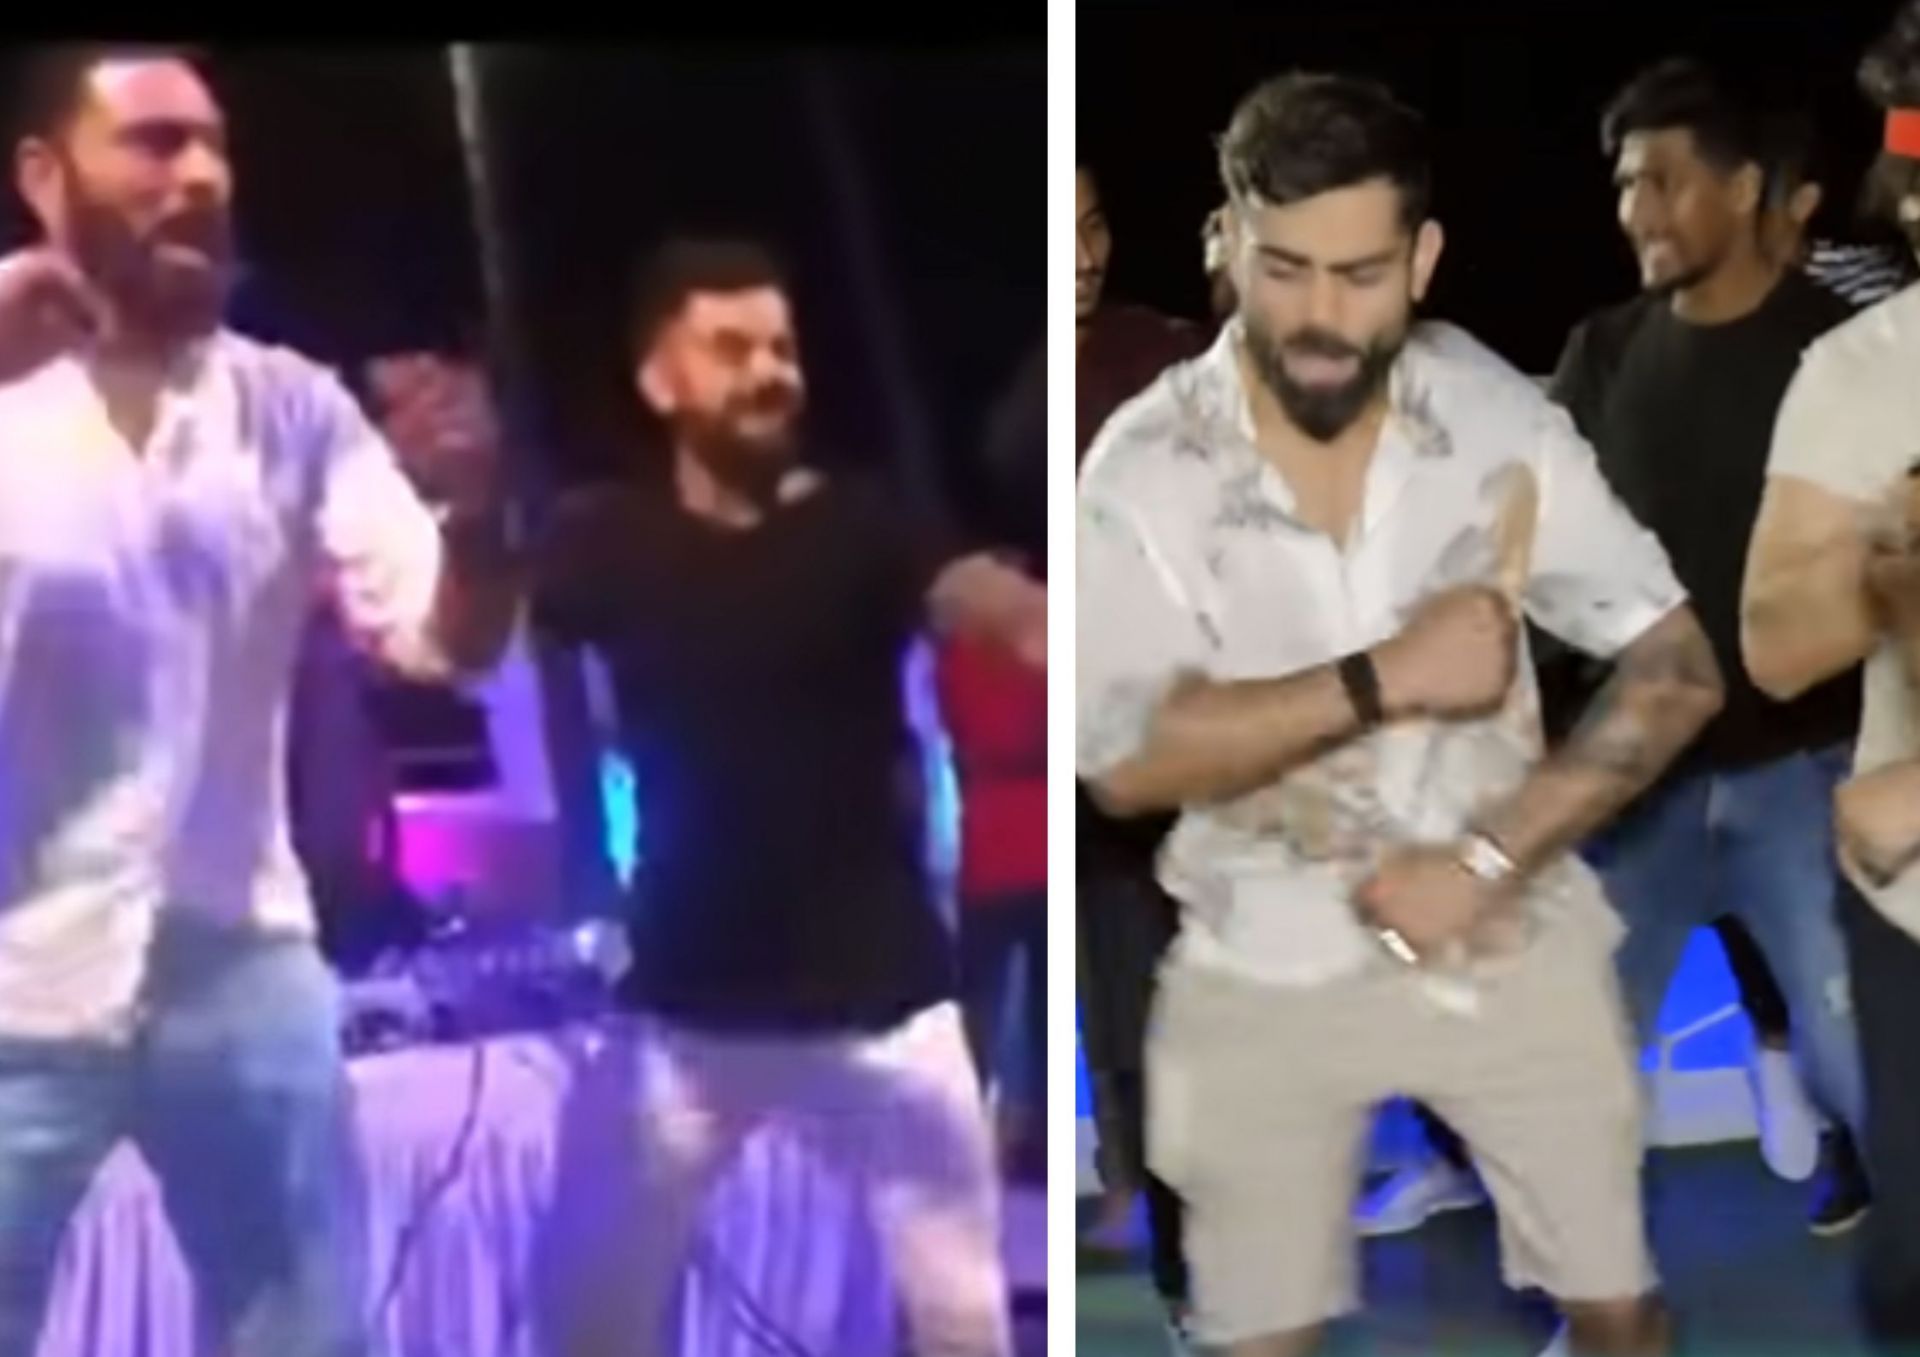 The former Indian skipper is quite the dancer alright (Screengrab via YouTube).